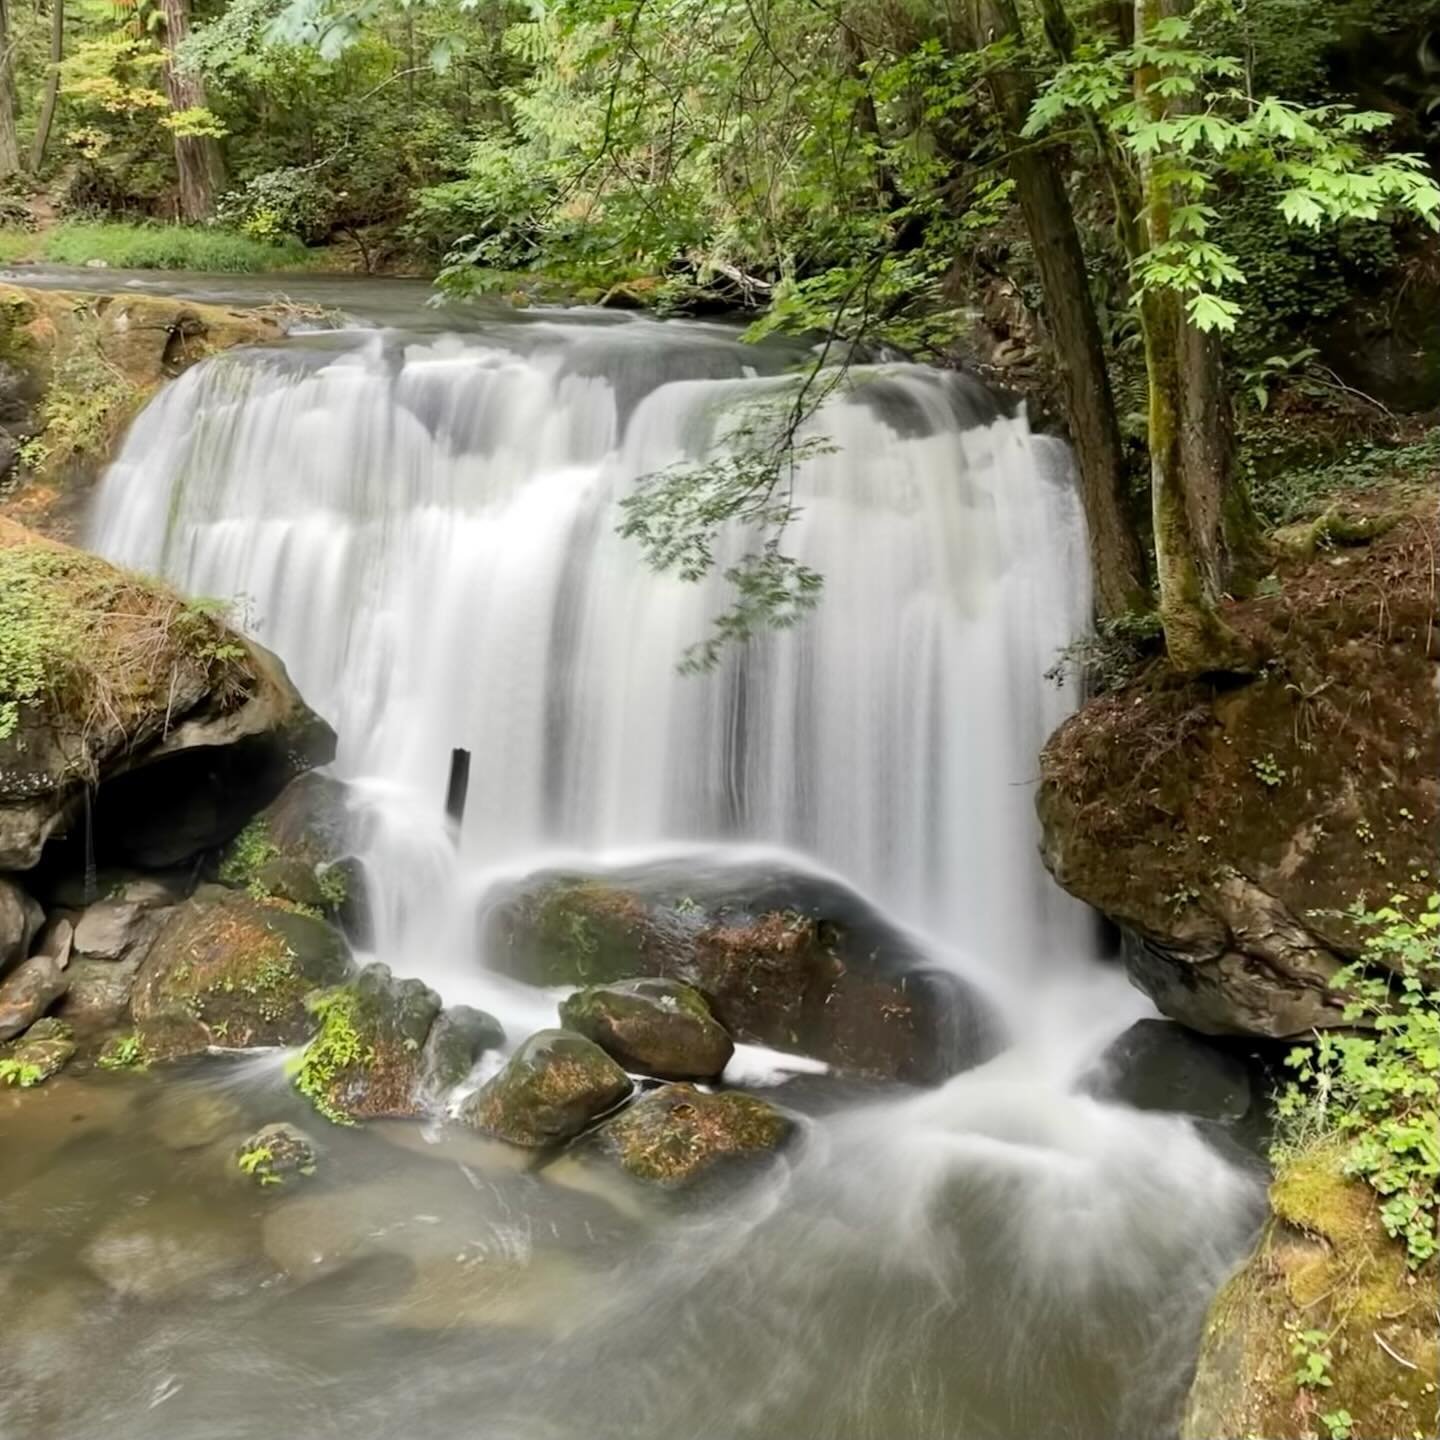 Whatcom Falls Park is another go-to spot for me to show people when they visit as this locally famous waterfall is quite beautiful to experience from the historic stone bridge. The park is also perfect for a stroll in the forested canopy along Whatco